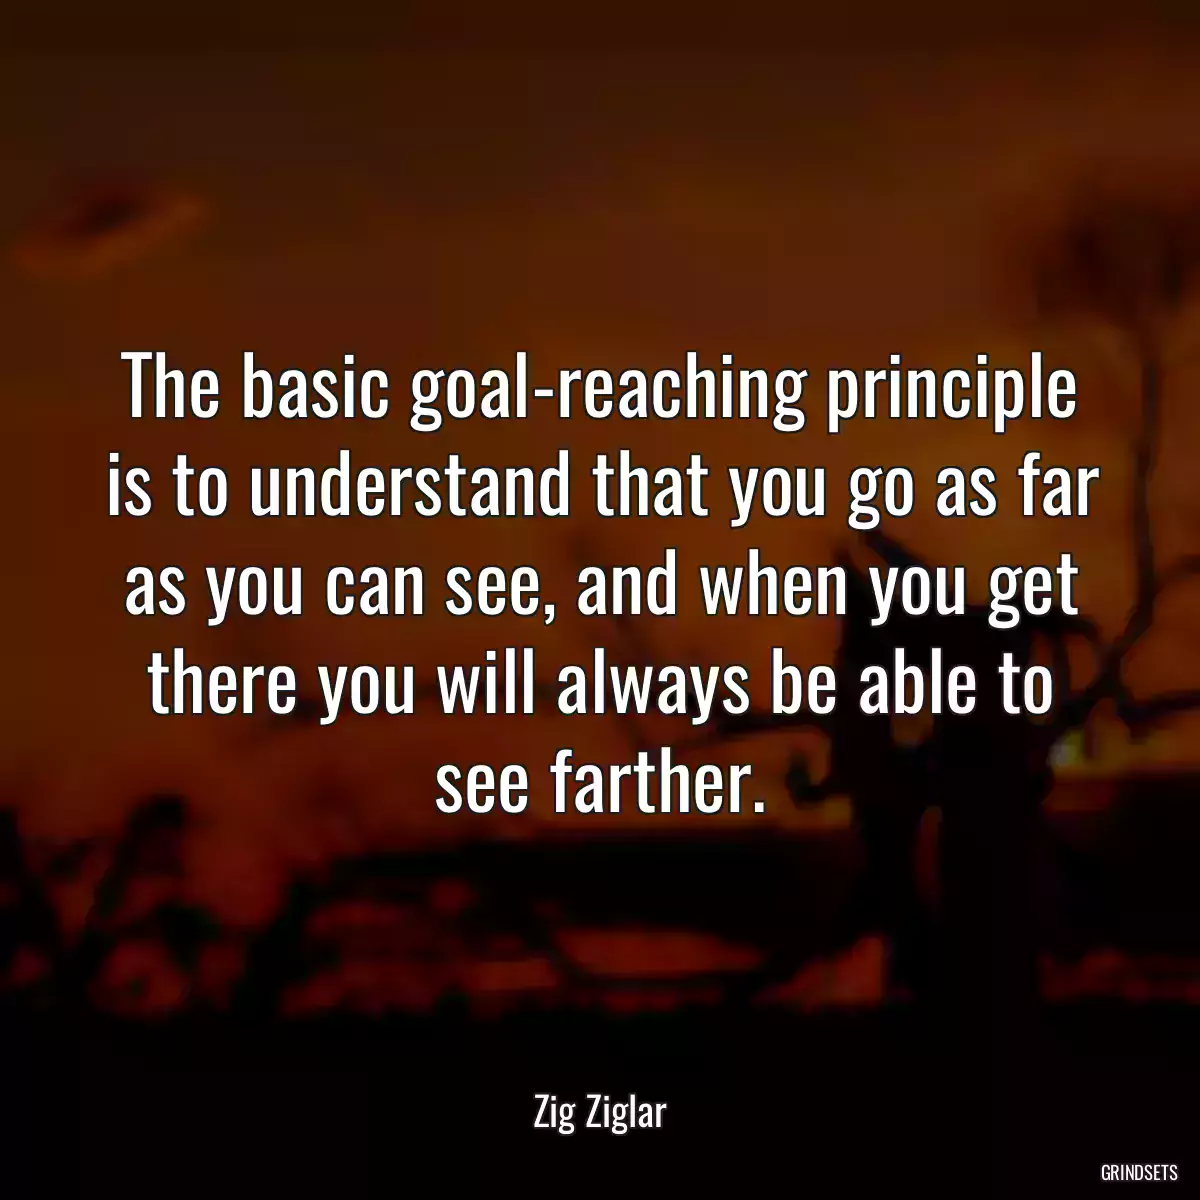 The basic goal-reaching principle is to understand that you go as far as you can see, and when you get there you will always be able to see farther.